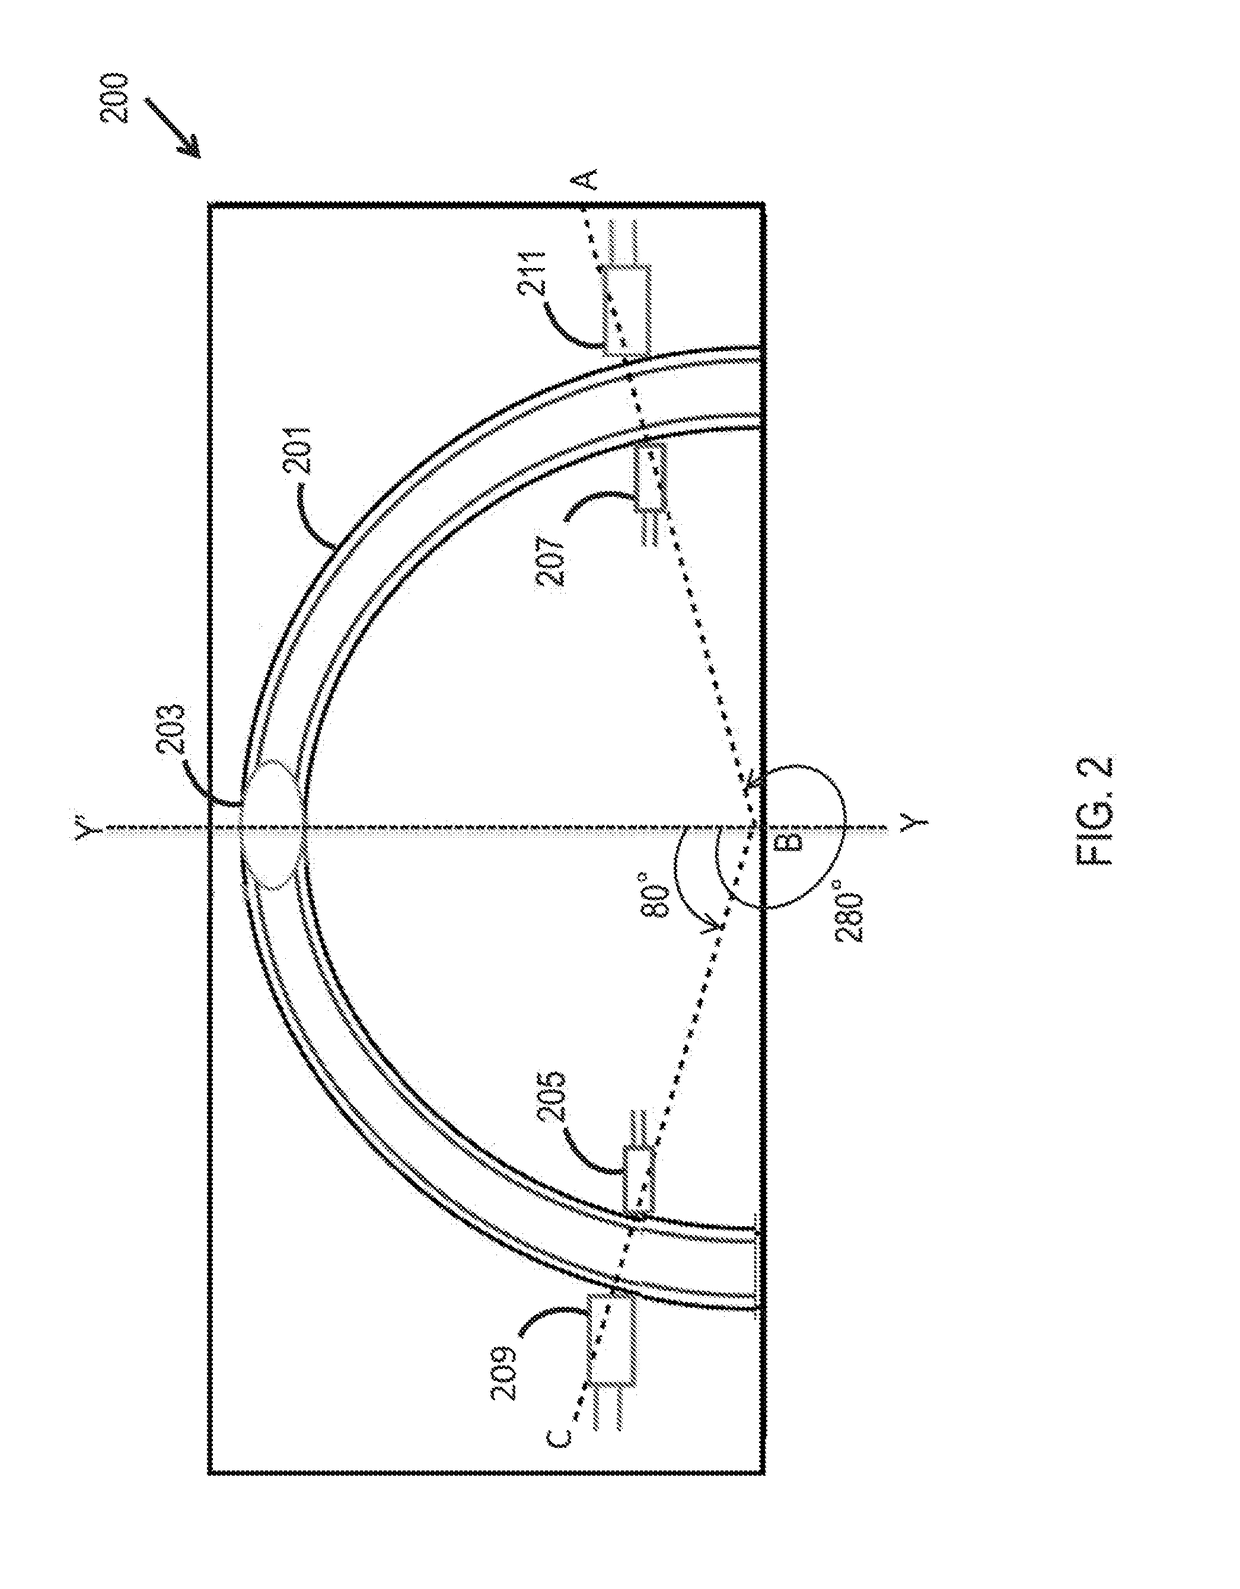 Vehicle rollover safety device utilizing a circular arc level